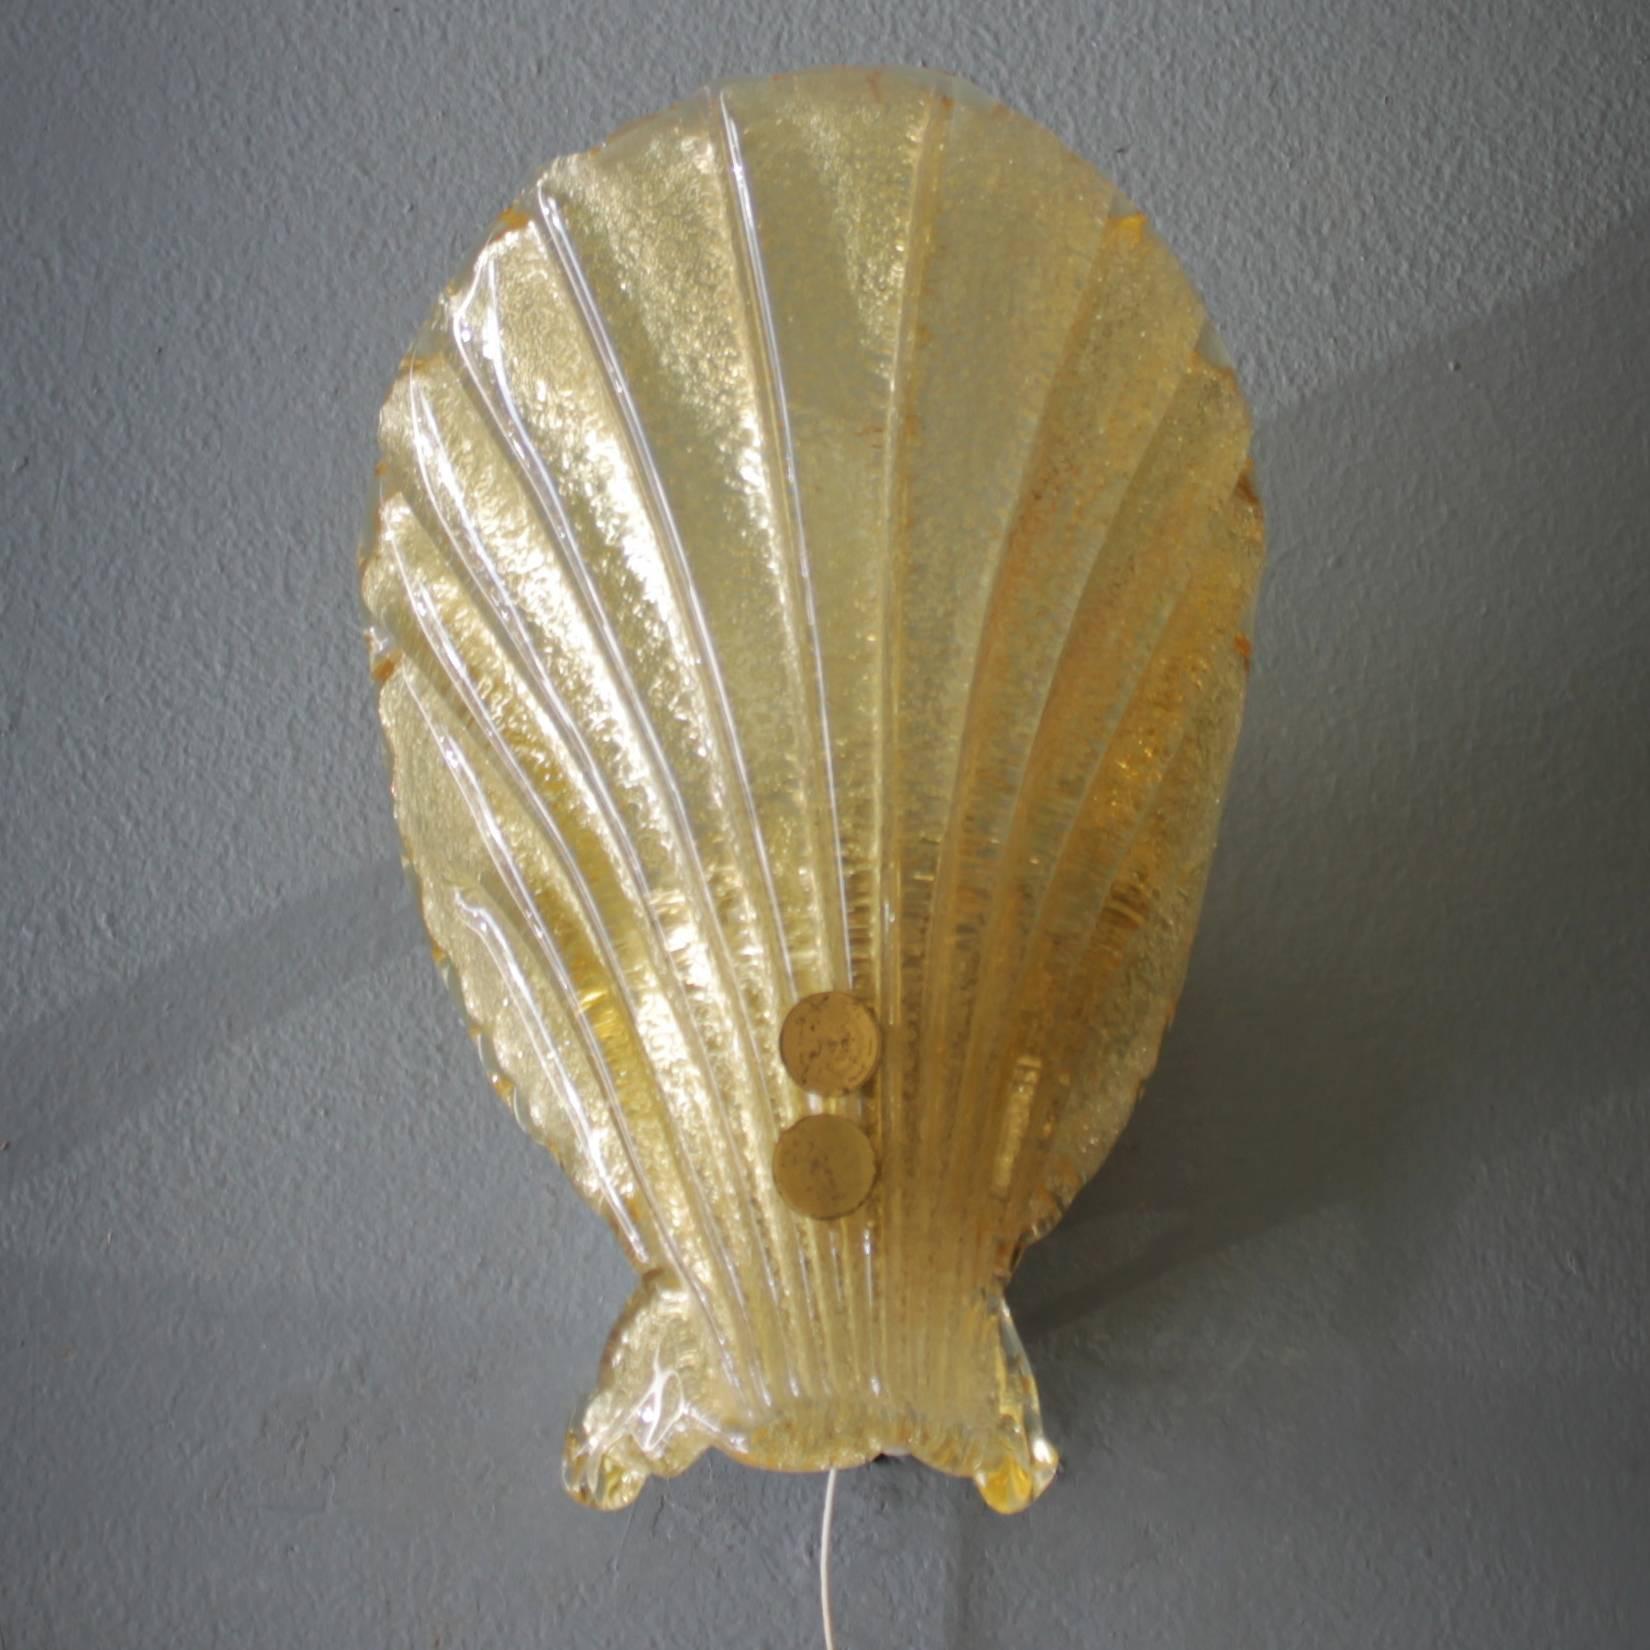 Murano gold fleck shell sconce in the manner of Barovier e Toso.
Dimensions: Height 8.9 in. (22.5 cm), width 6.3 in. (16 cm), depth 3.9 inches (10 cm).
The electricity is used but in a good condition, approved to European standards. Works in the